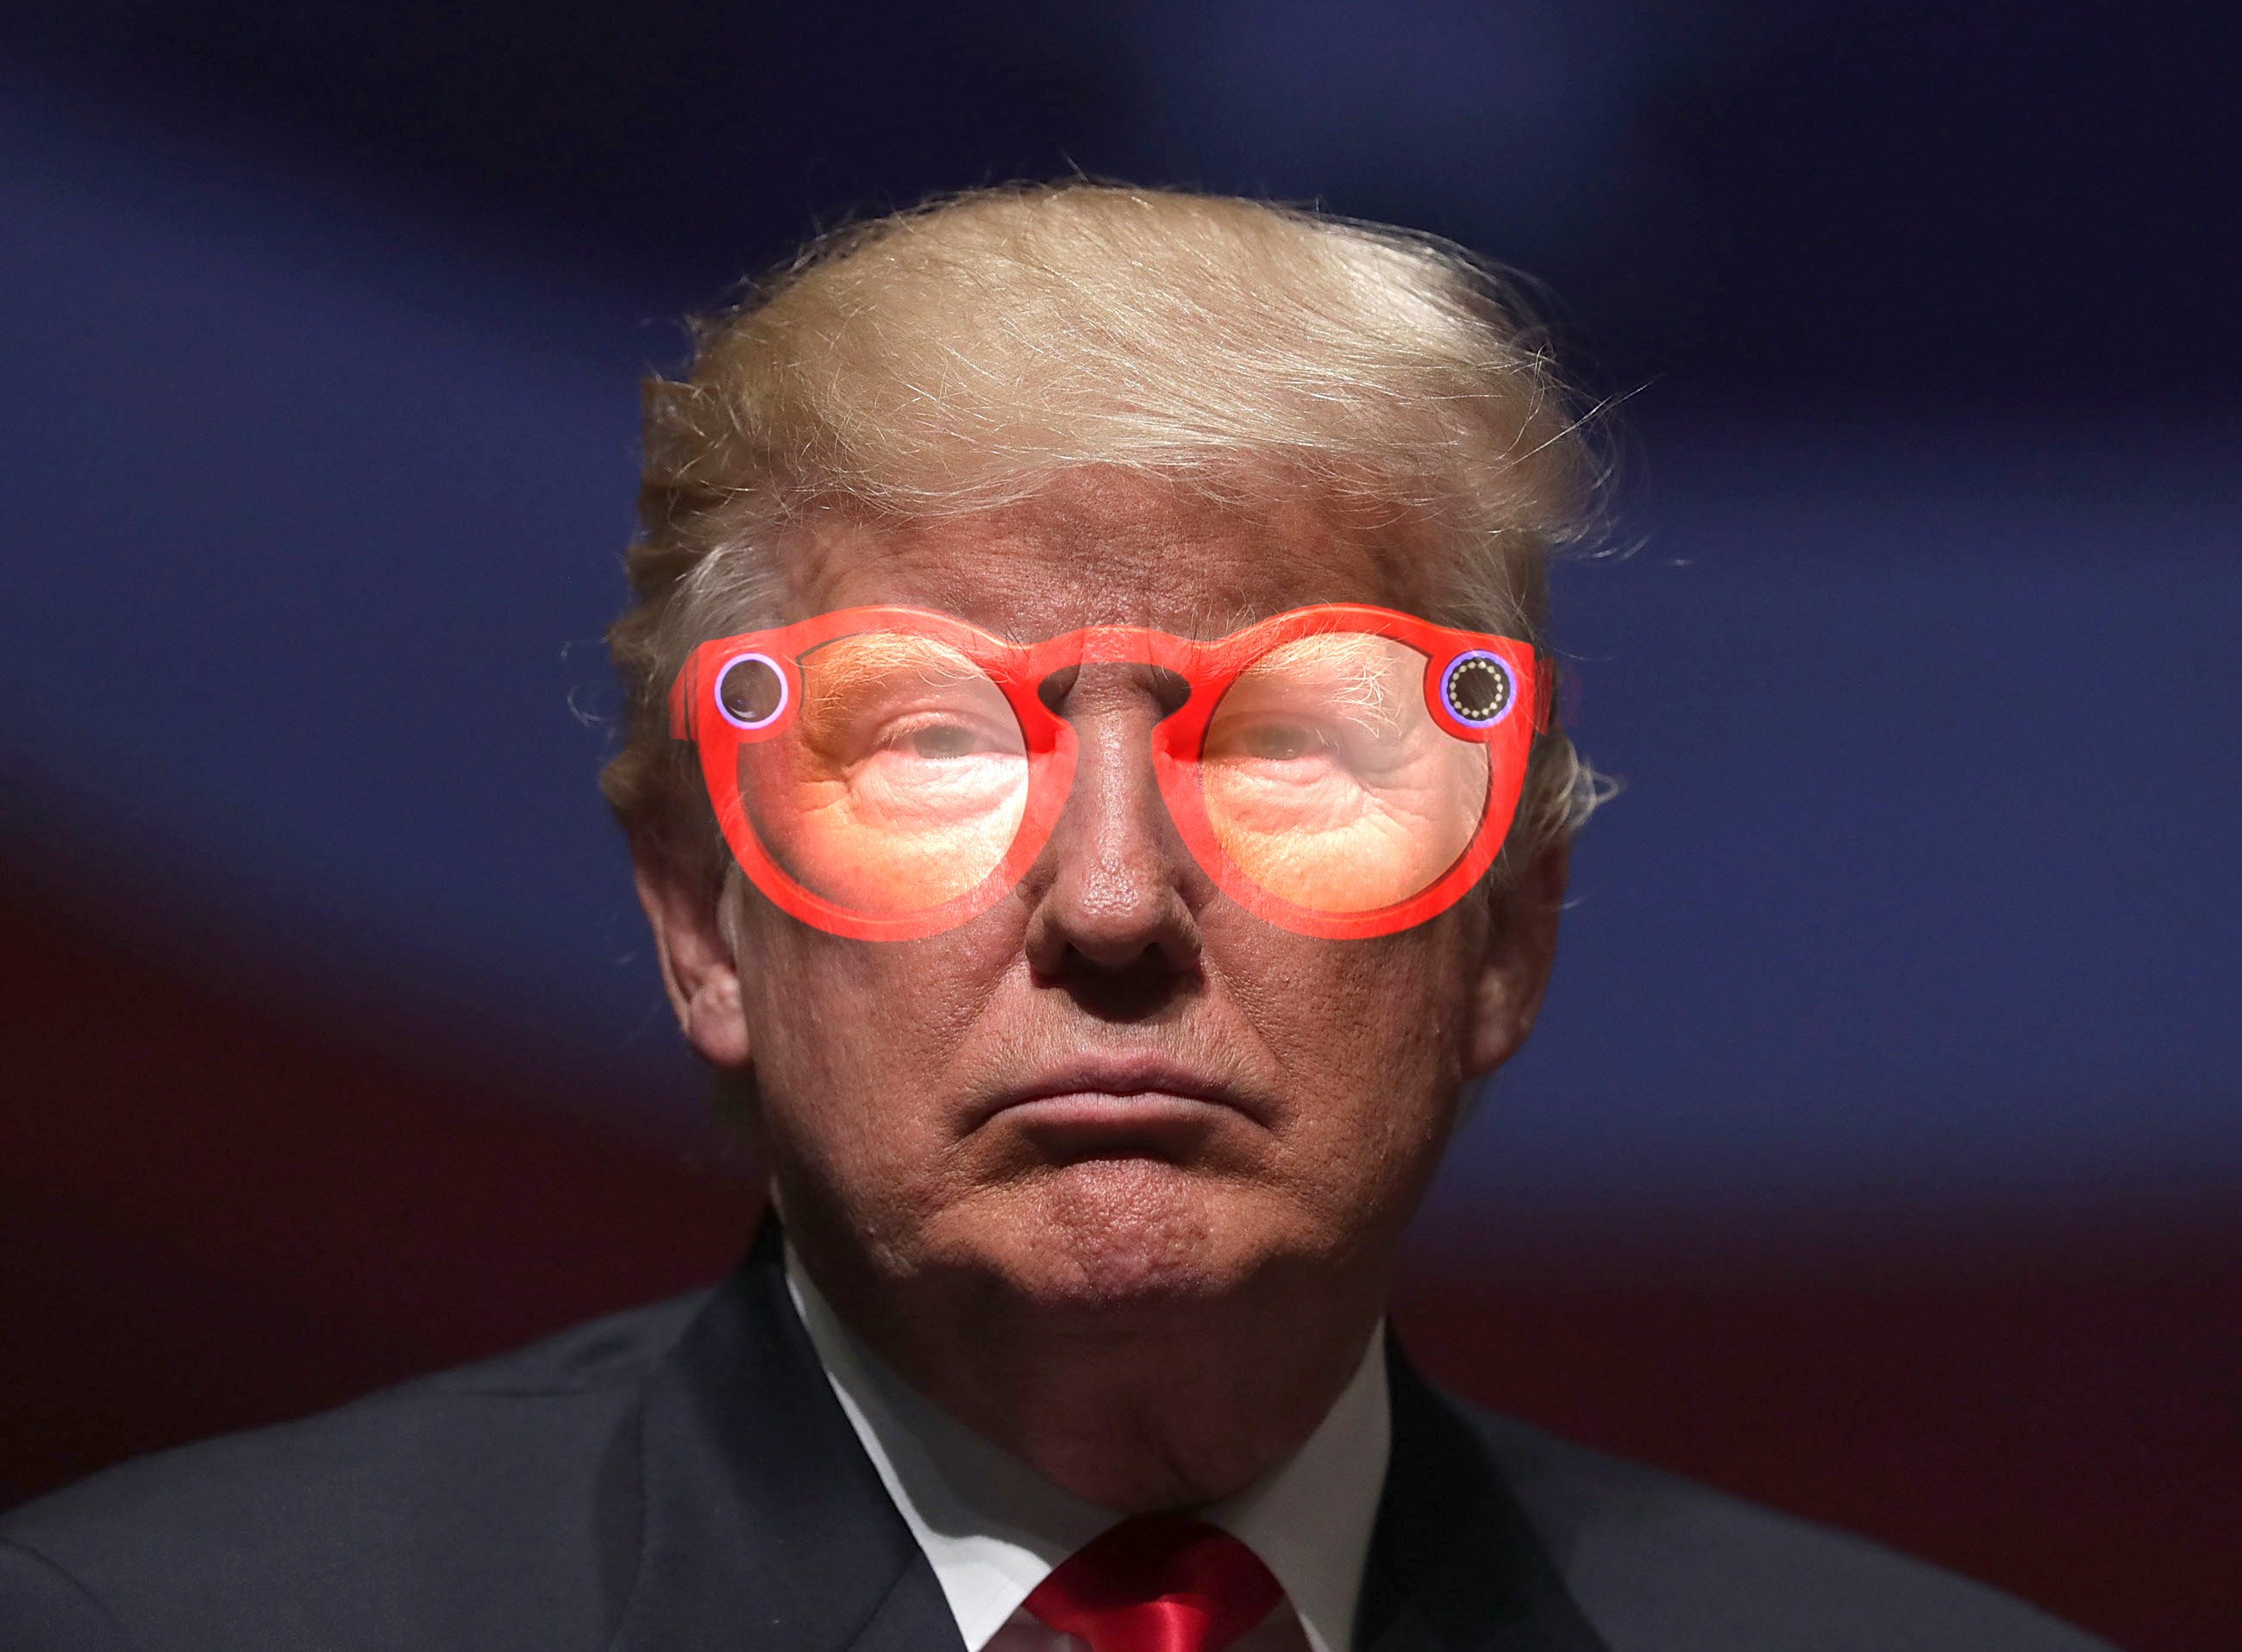 Donald Trump Snapchat spectacles